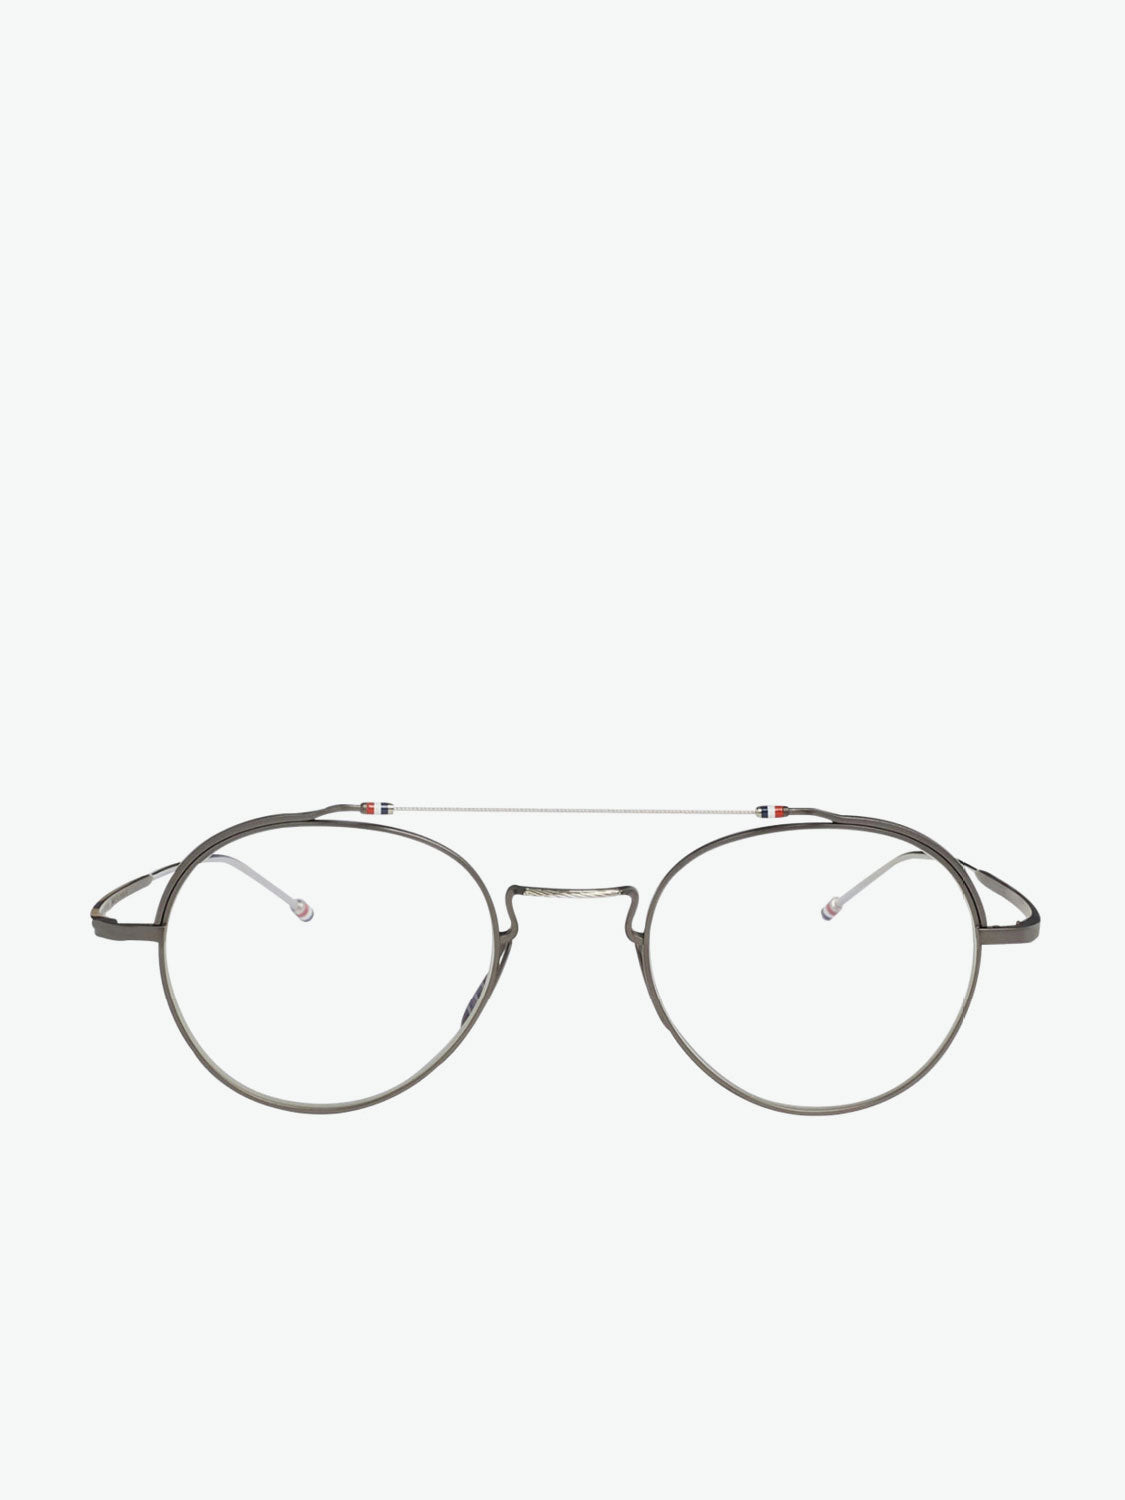 Thom Browne TBX912 Black Iron And Silver Oval Optical Glasses